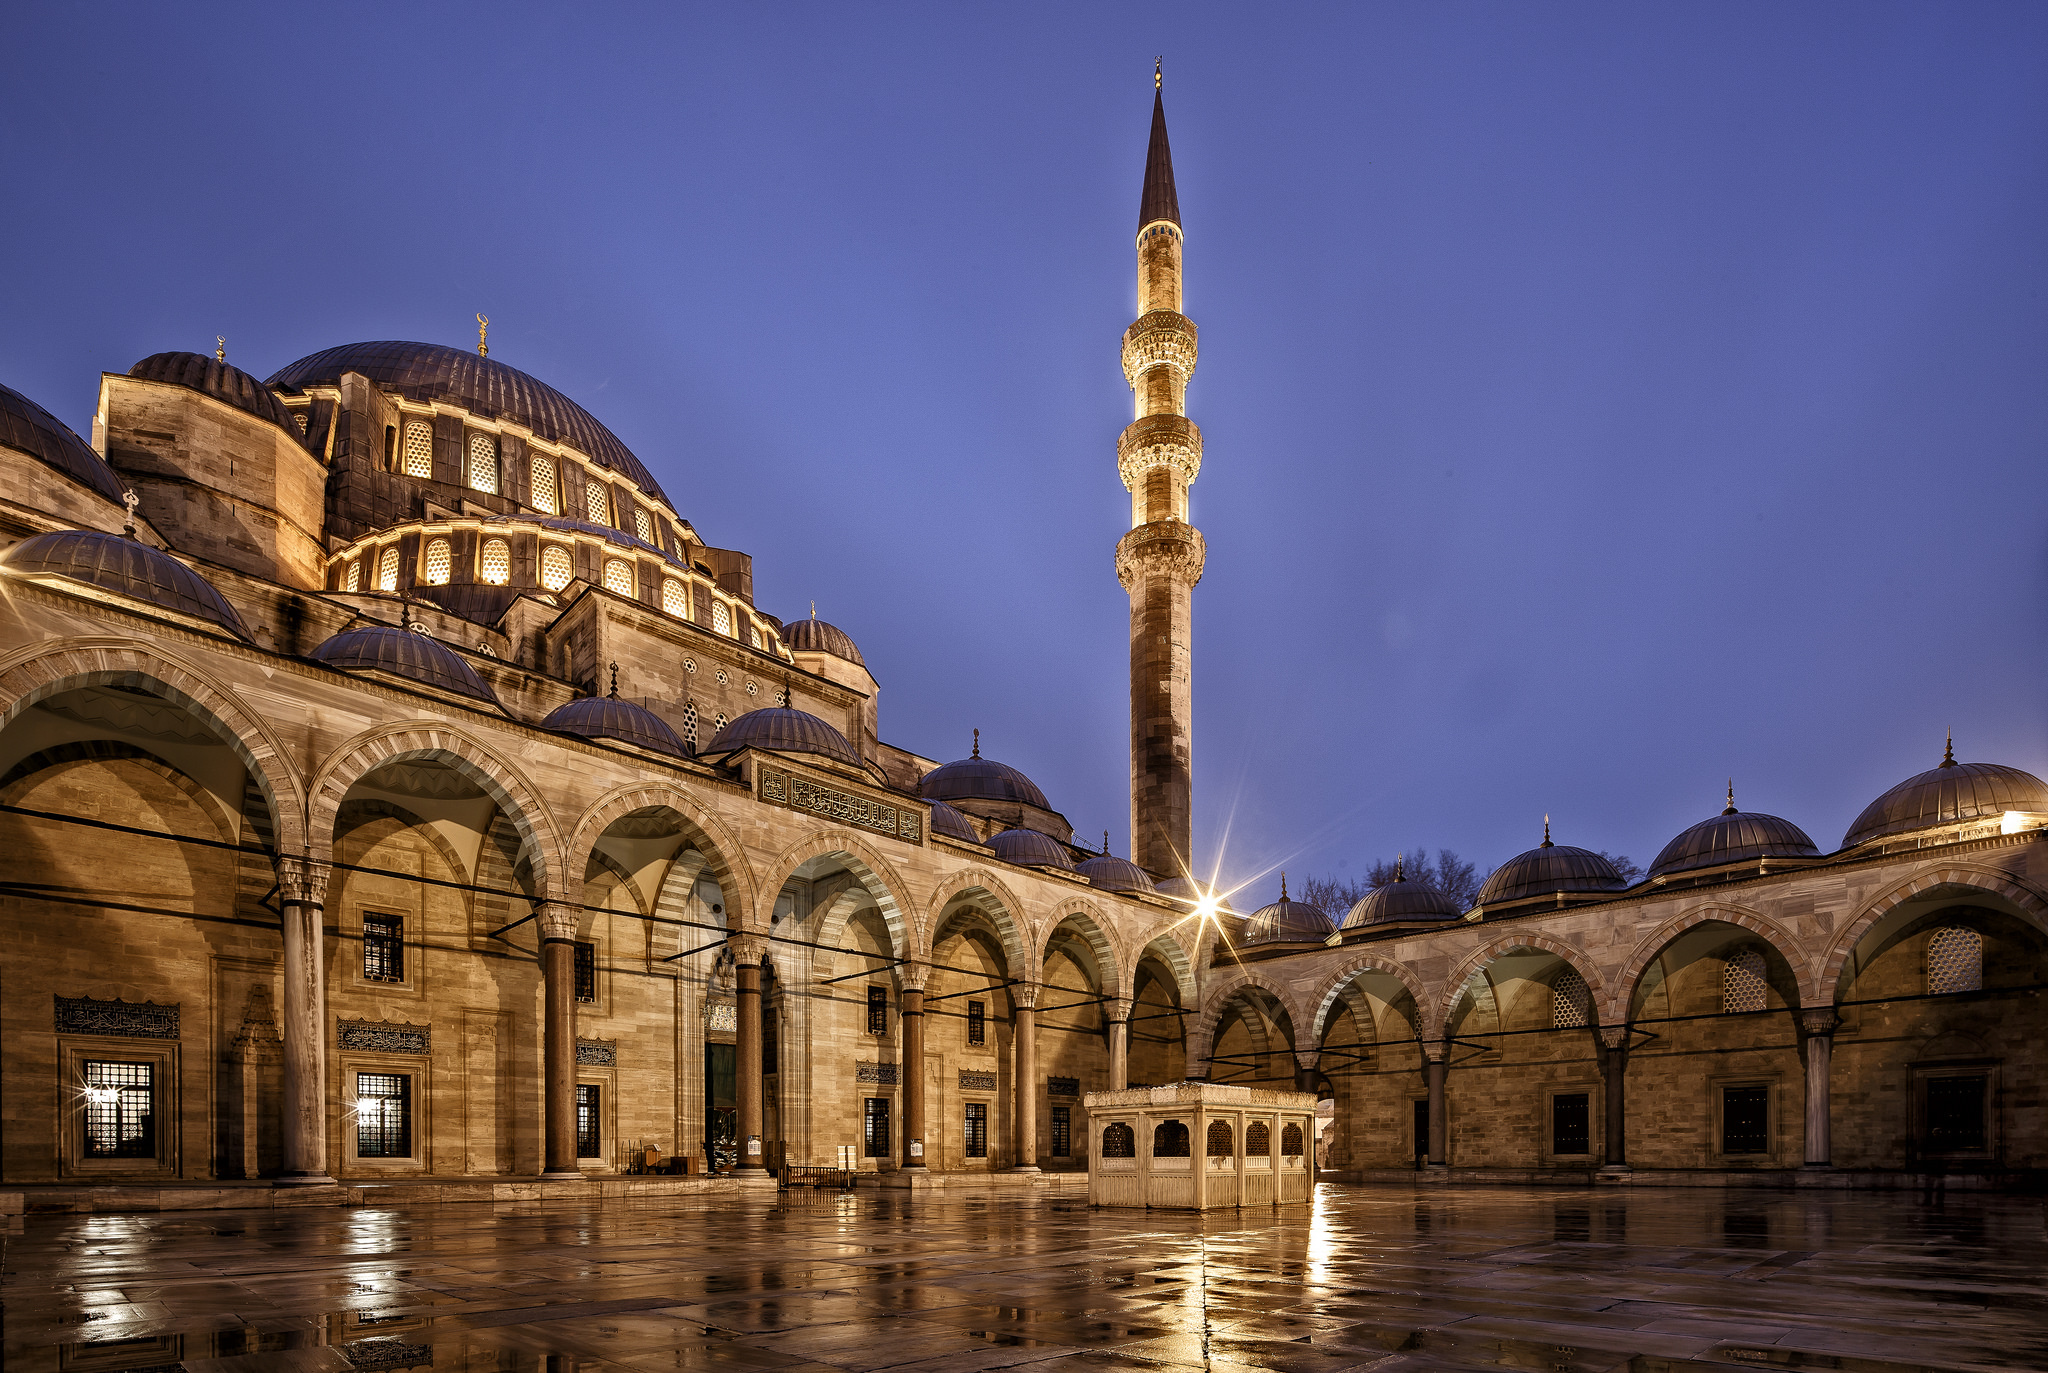 suleymaniye mosque, mosque, night, religious, architecture, building, dome, istanbul, mosques